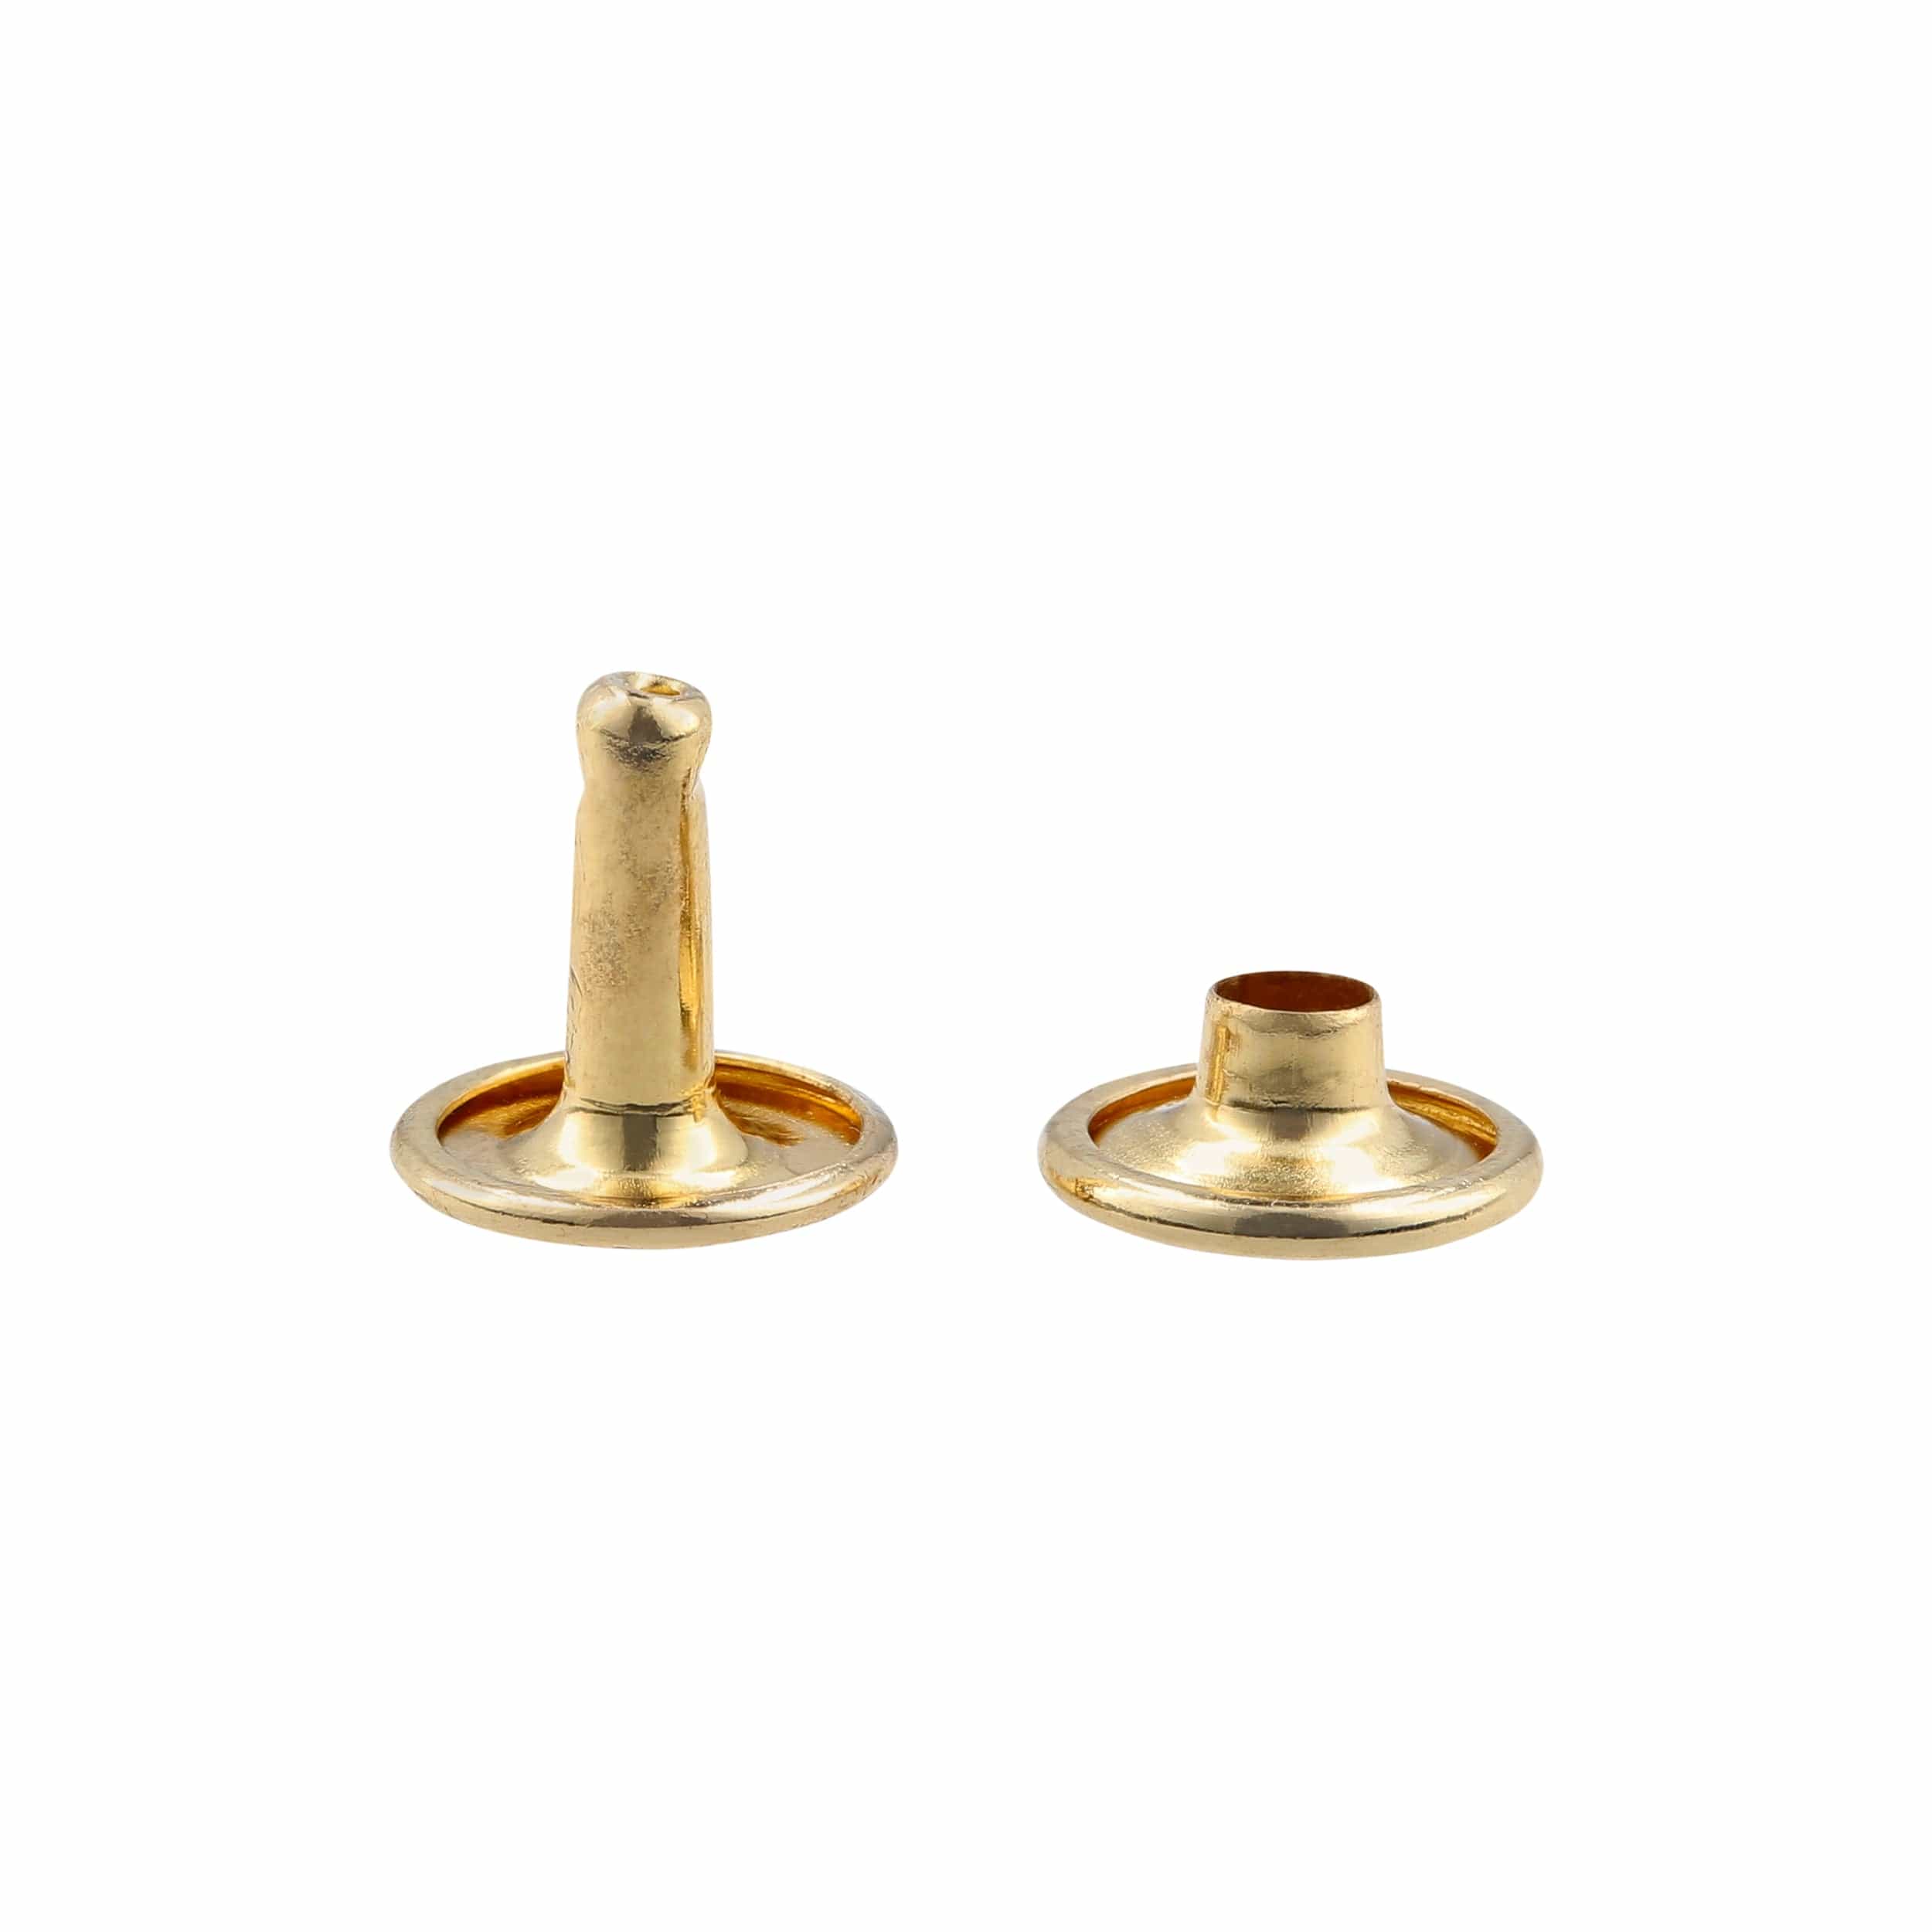 Ohio Travel Bag Fasteners 9mm Gold, Double Cap Jiffy Rivets, Steel, #A-311-GOLD A-311-GOLD